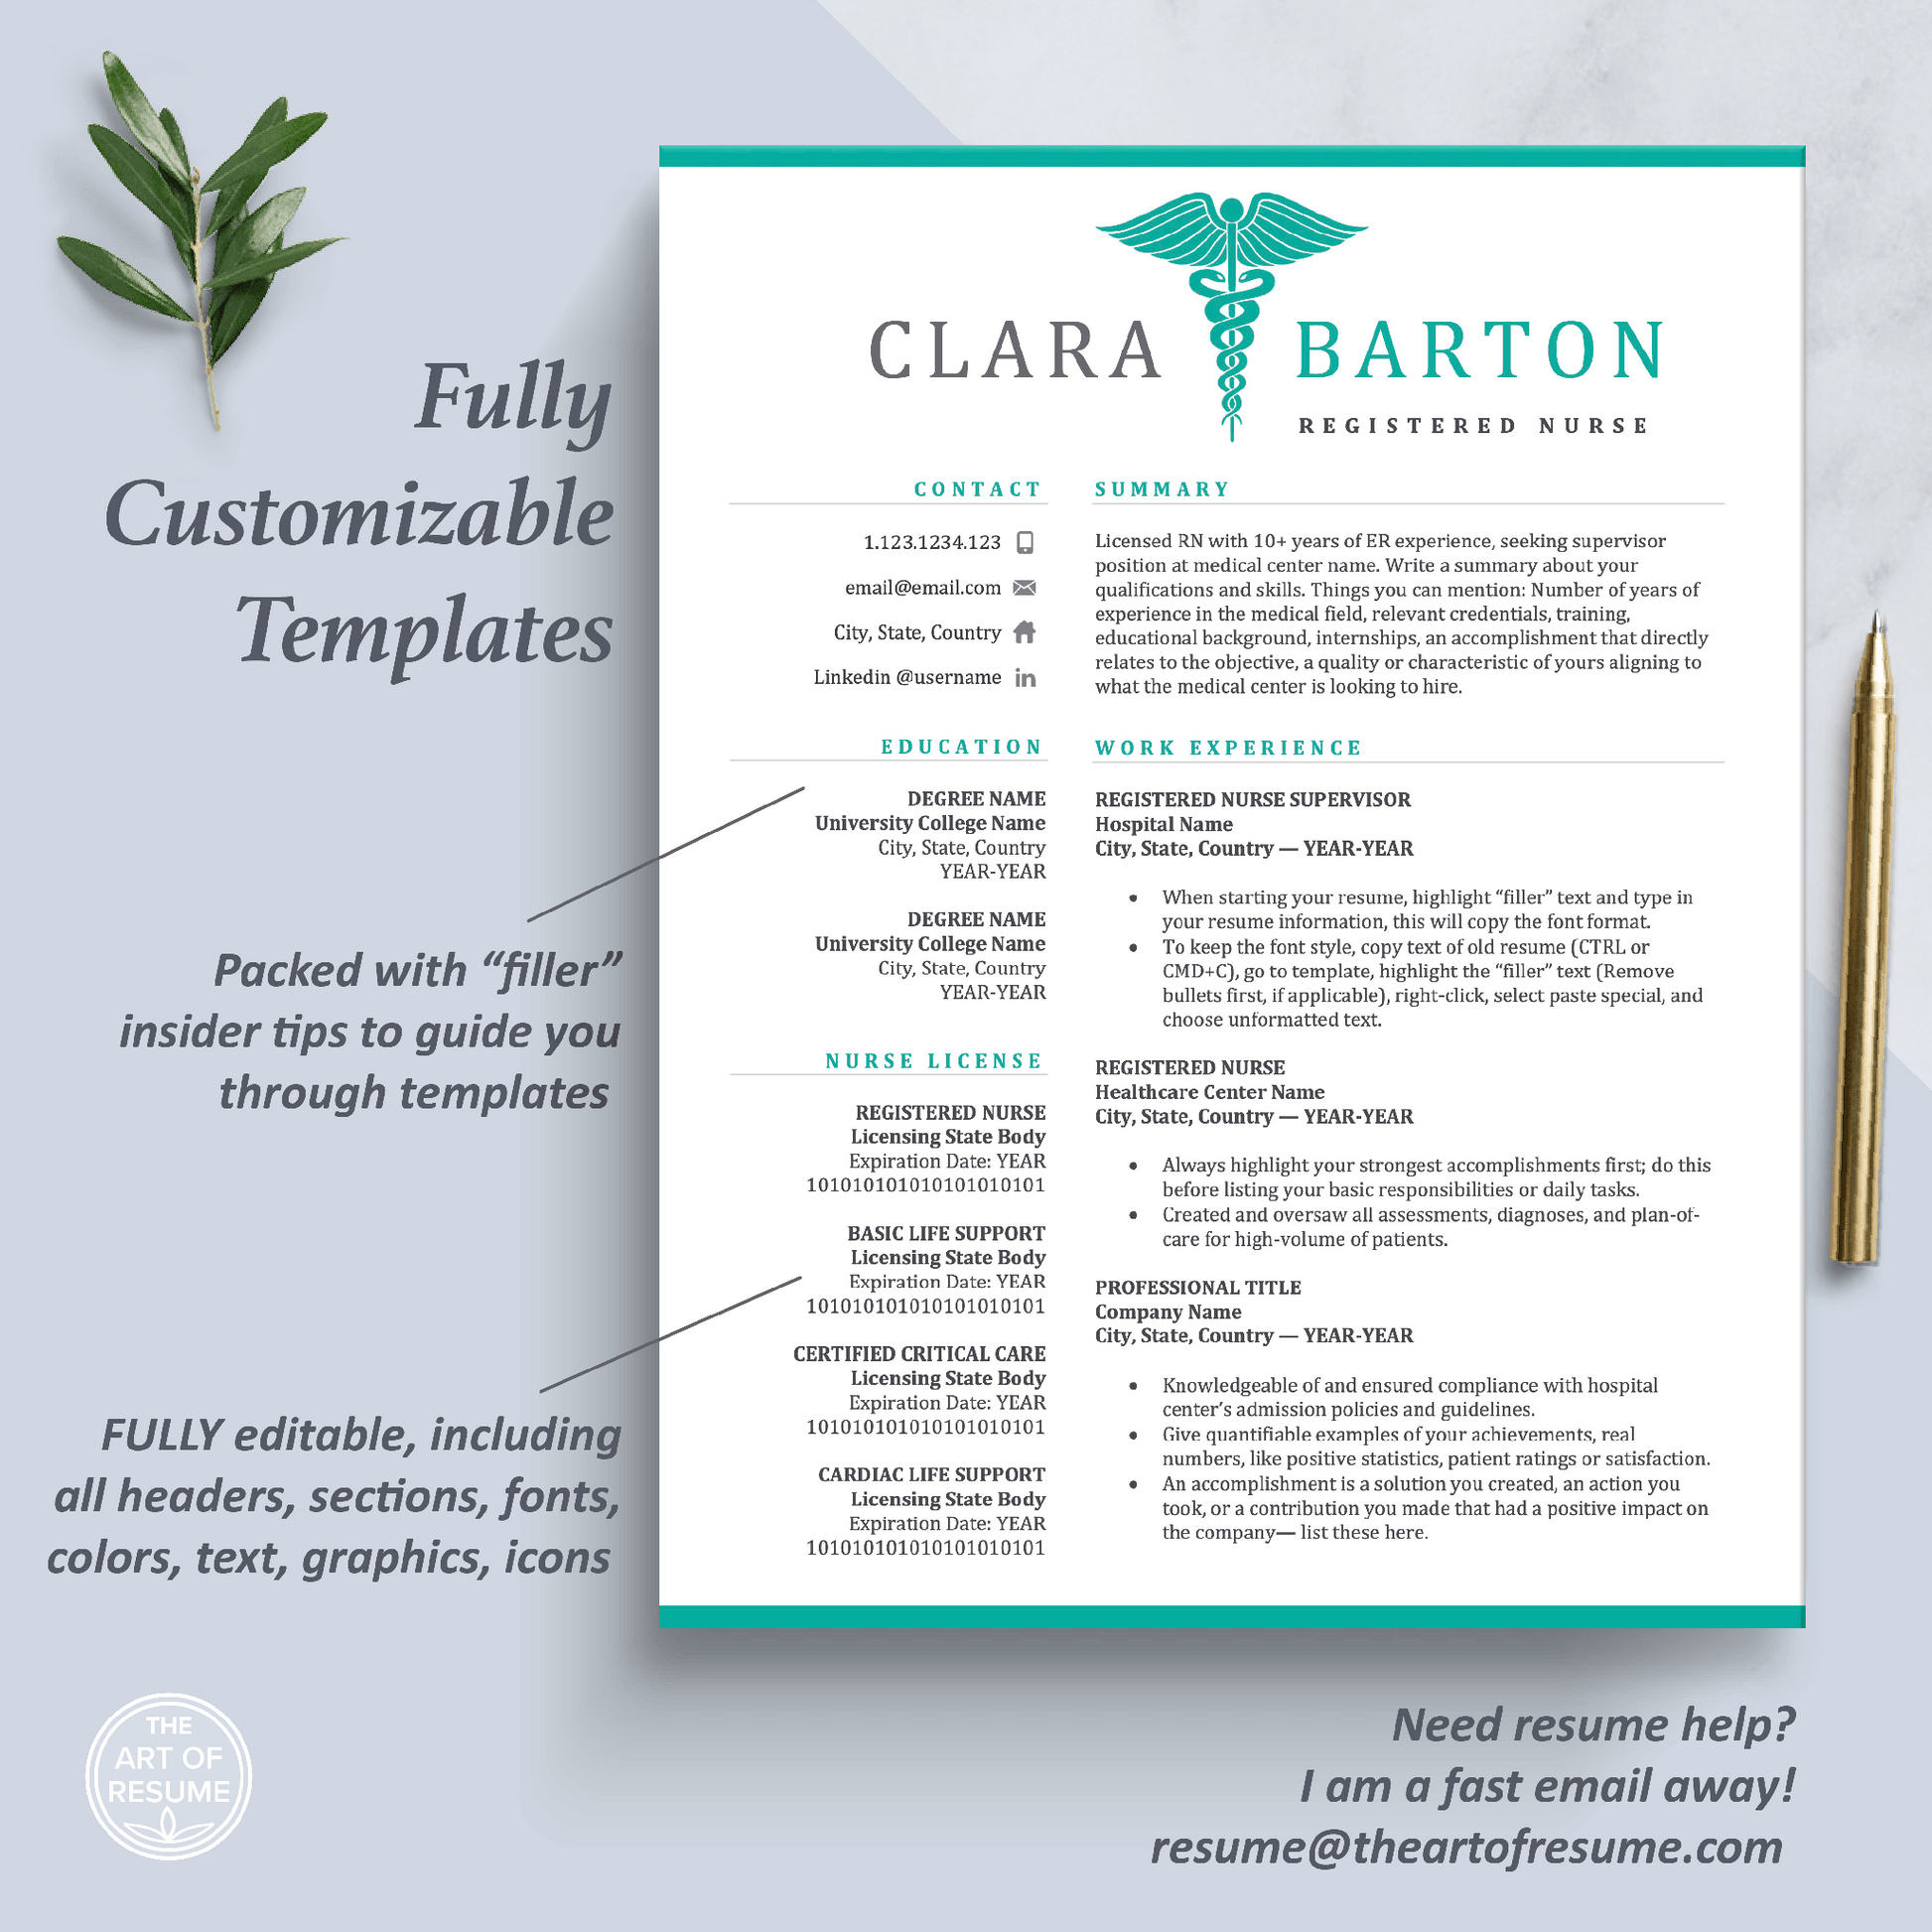 The Art of Resume Templates | One Page Professional Nurse Doctor Medical Resume CV Design Template Maker | Curriculum Vitae